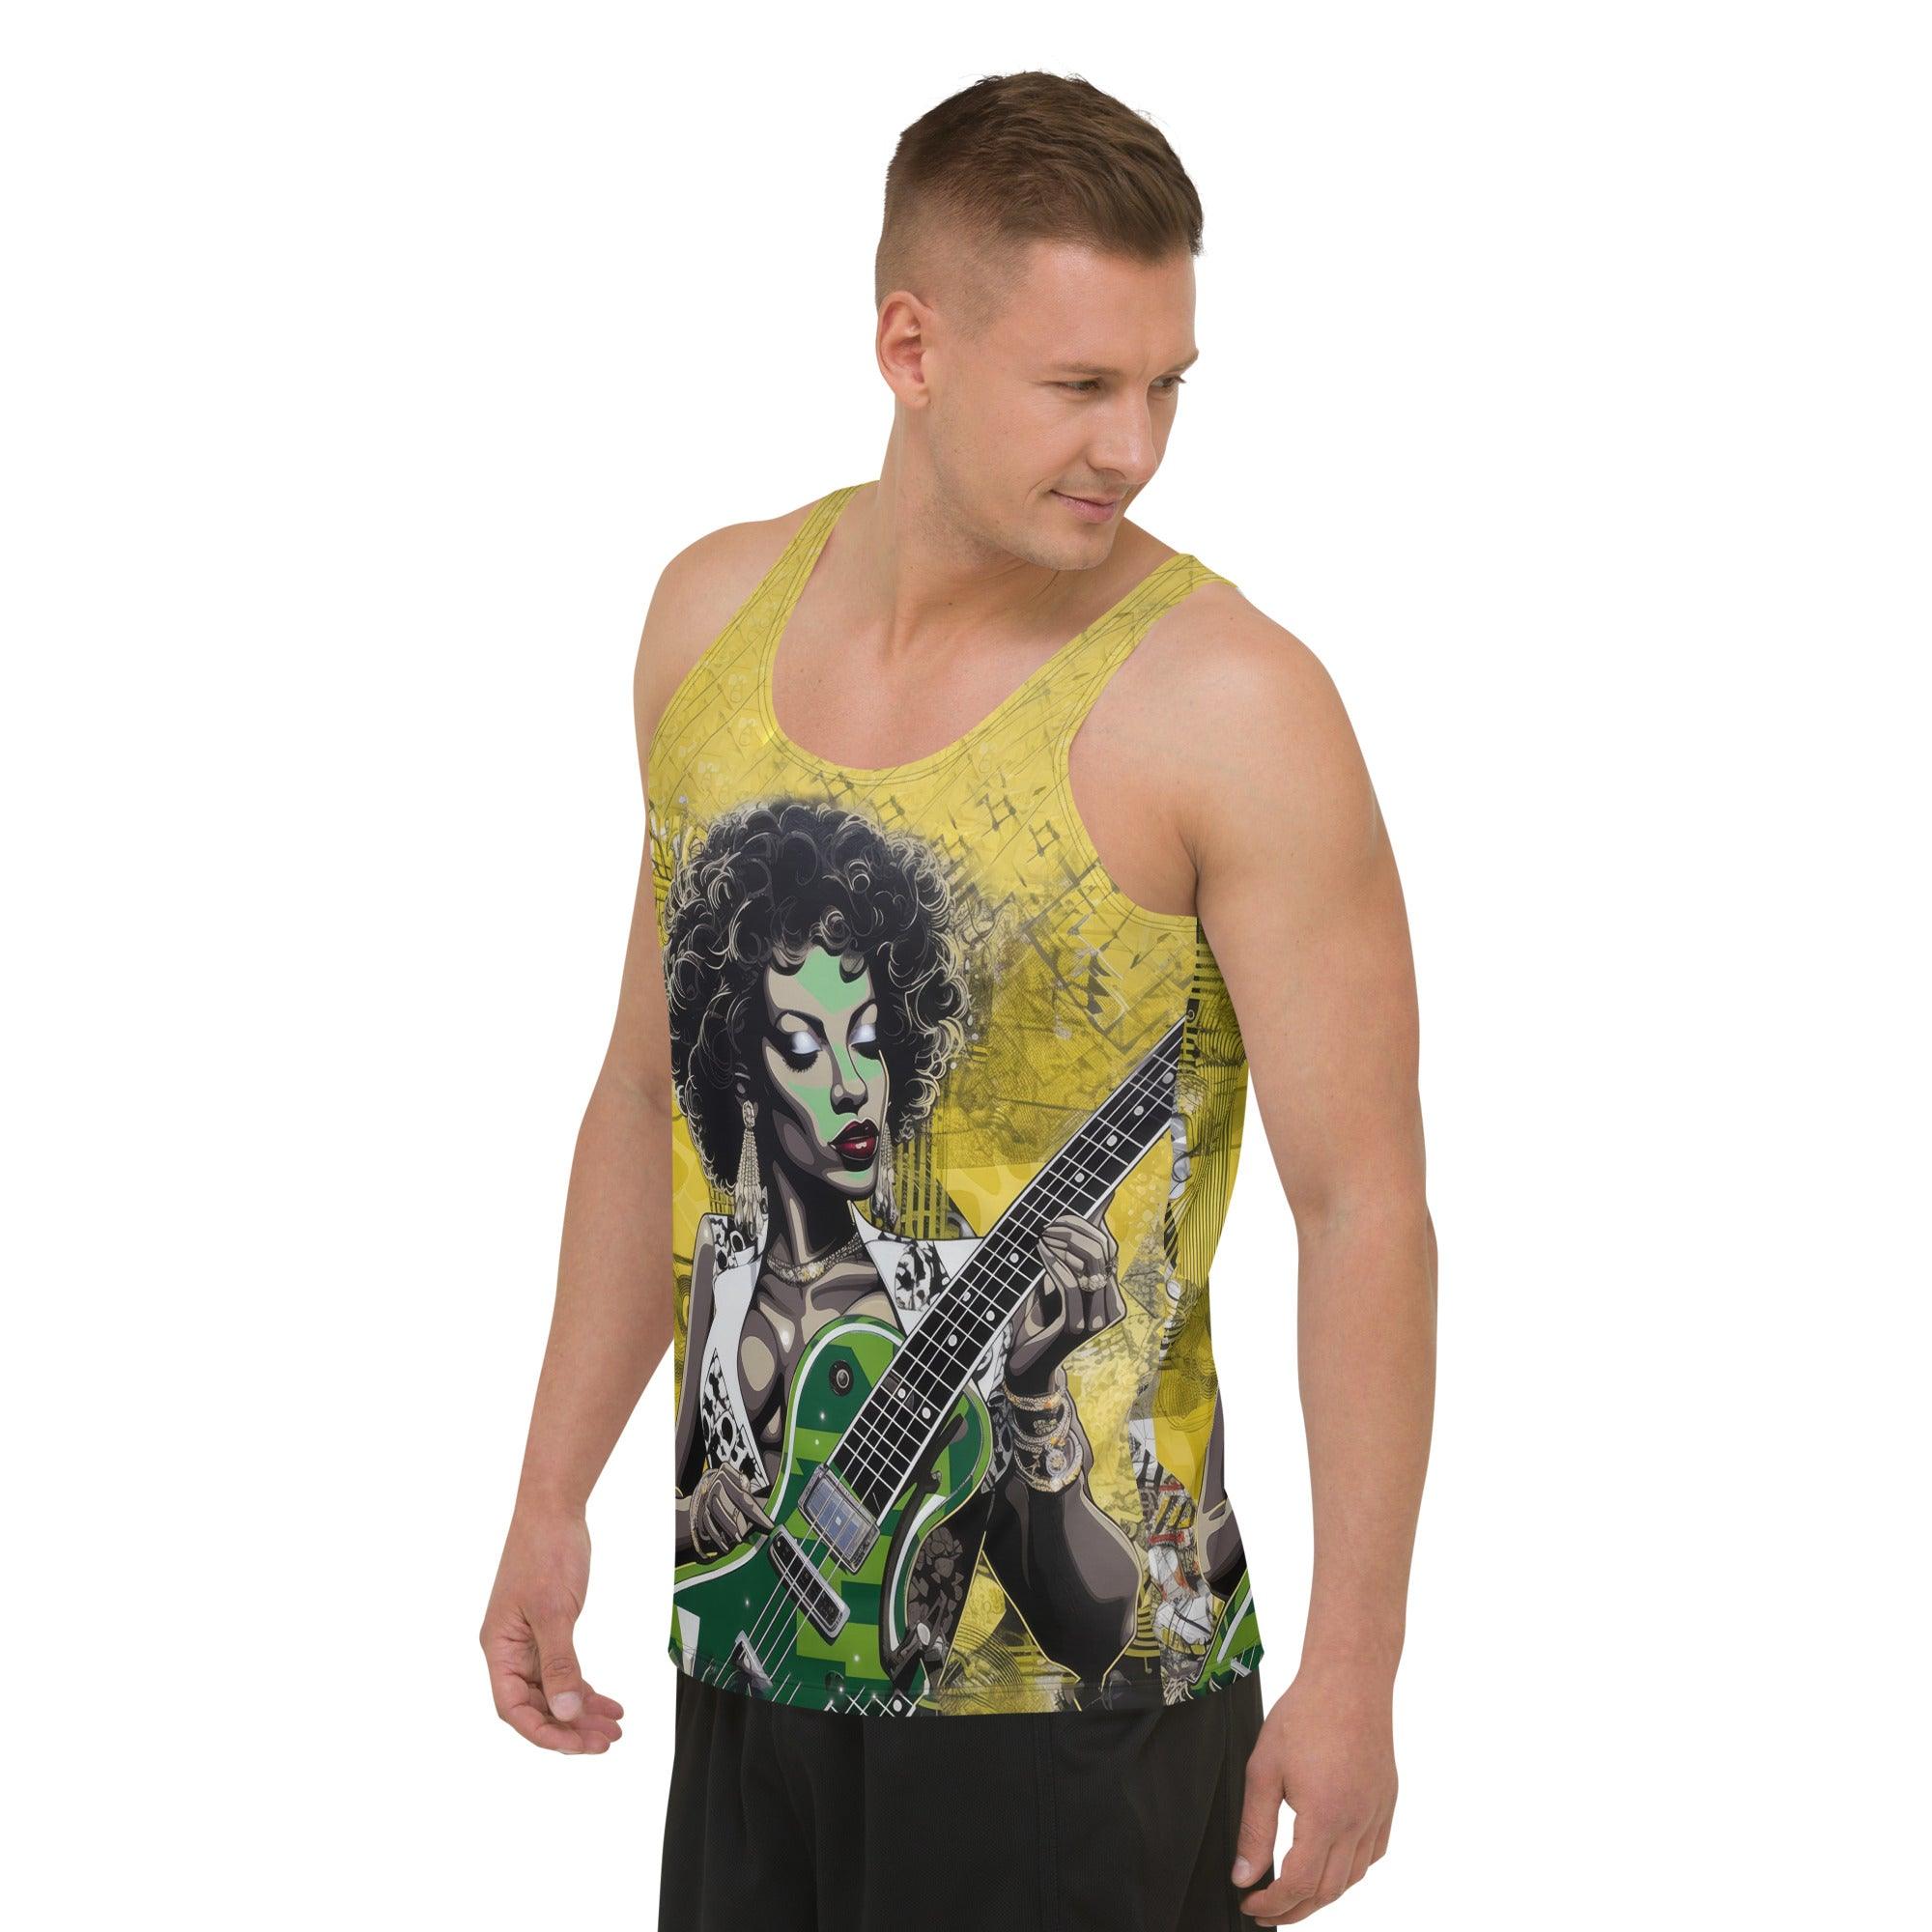 Black Tank Top with Live Music Graphic